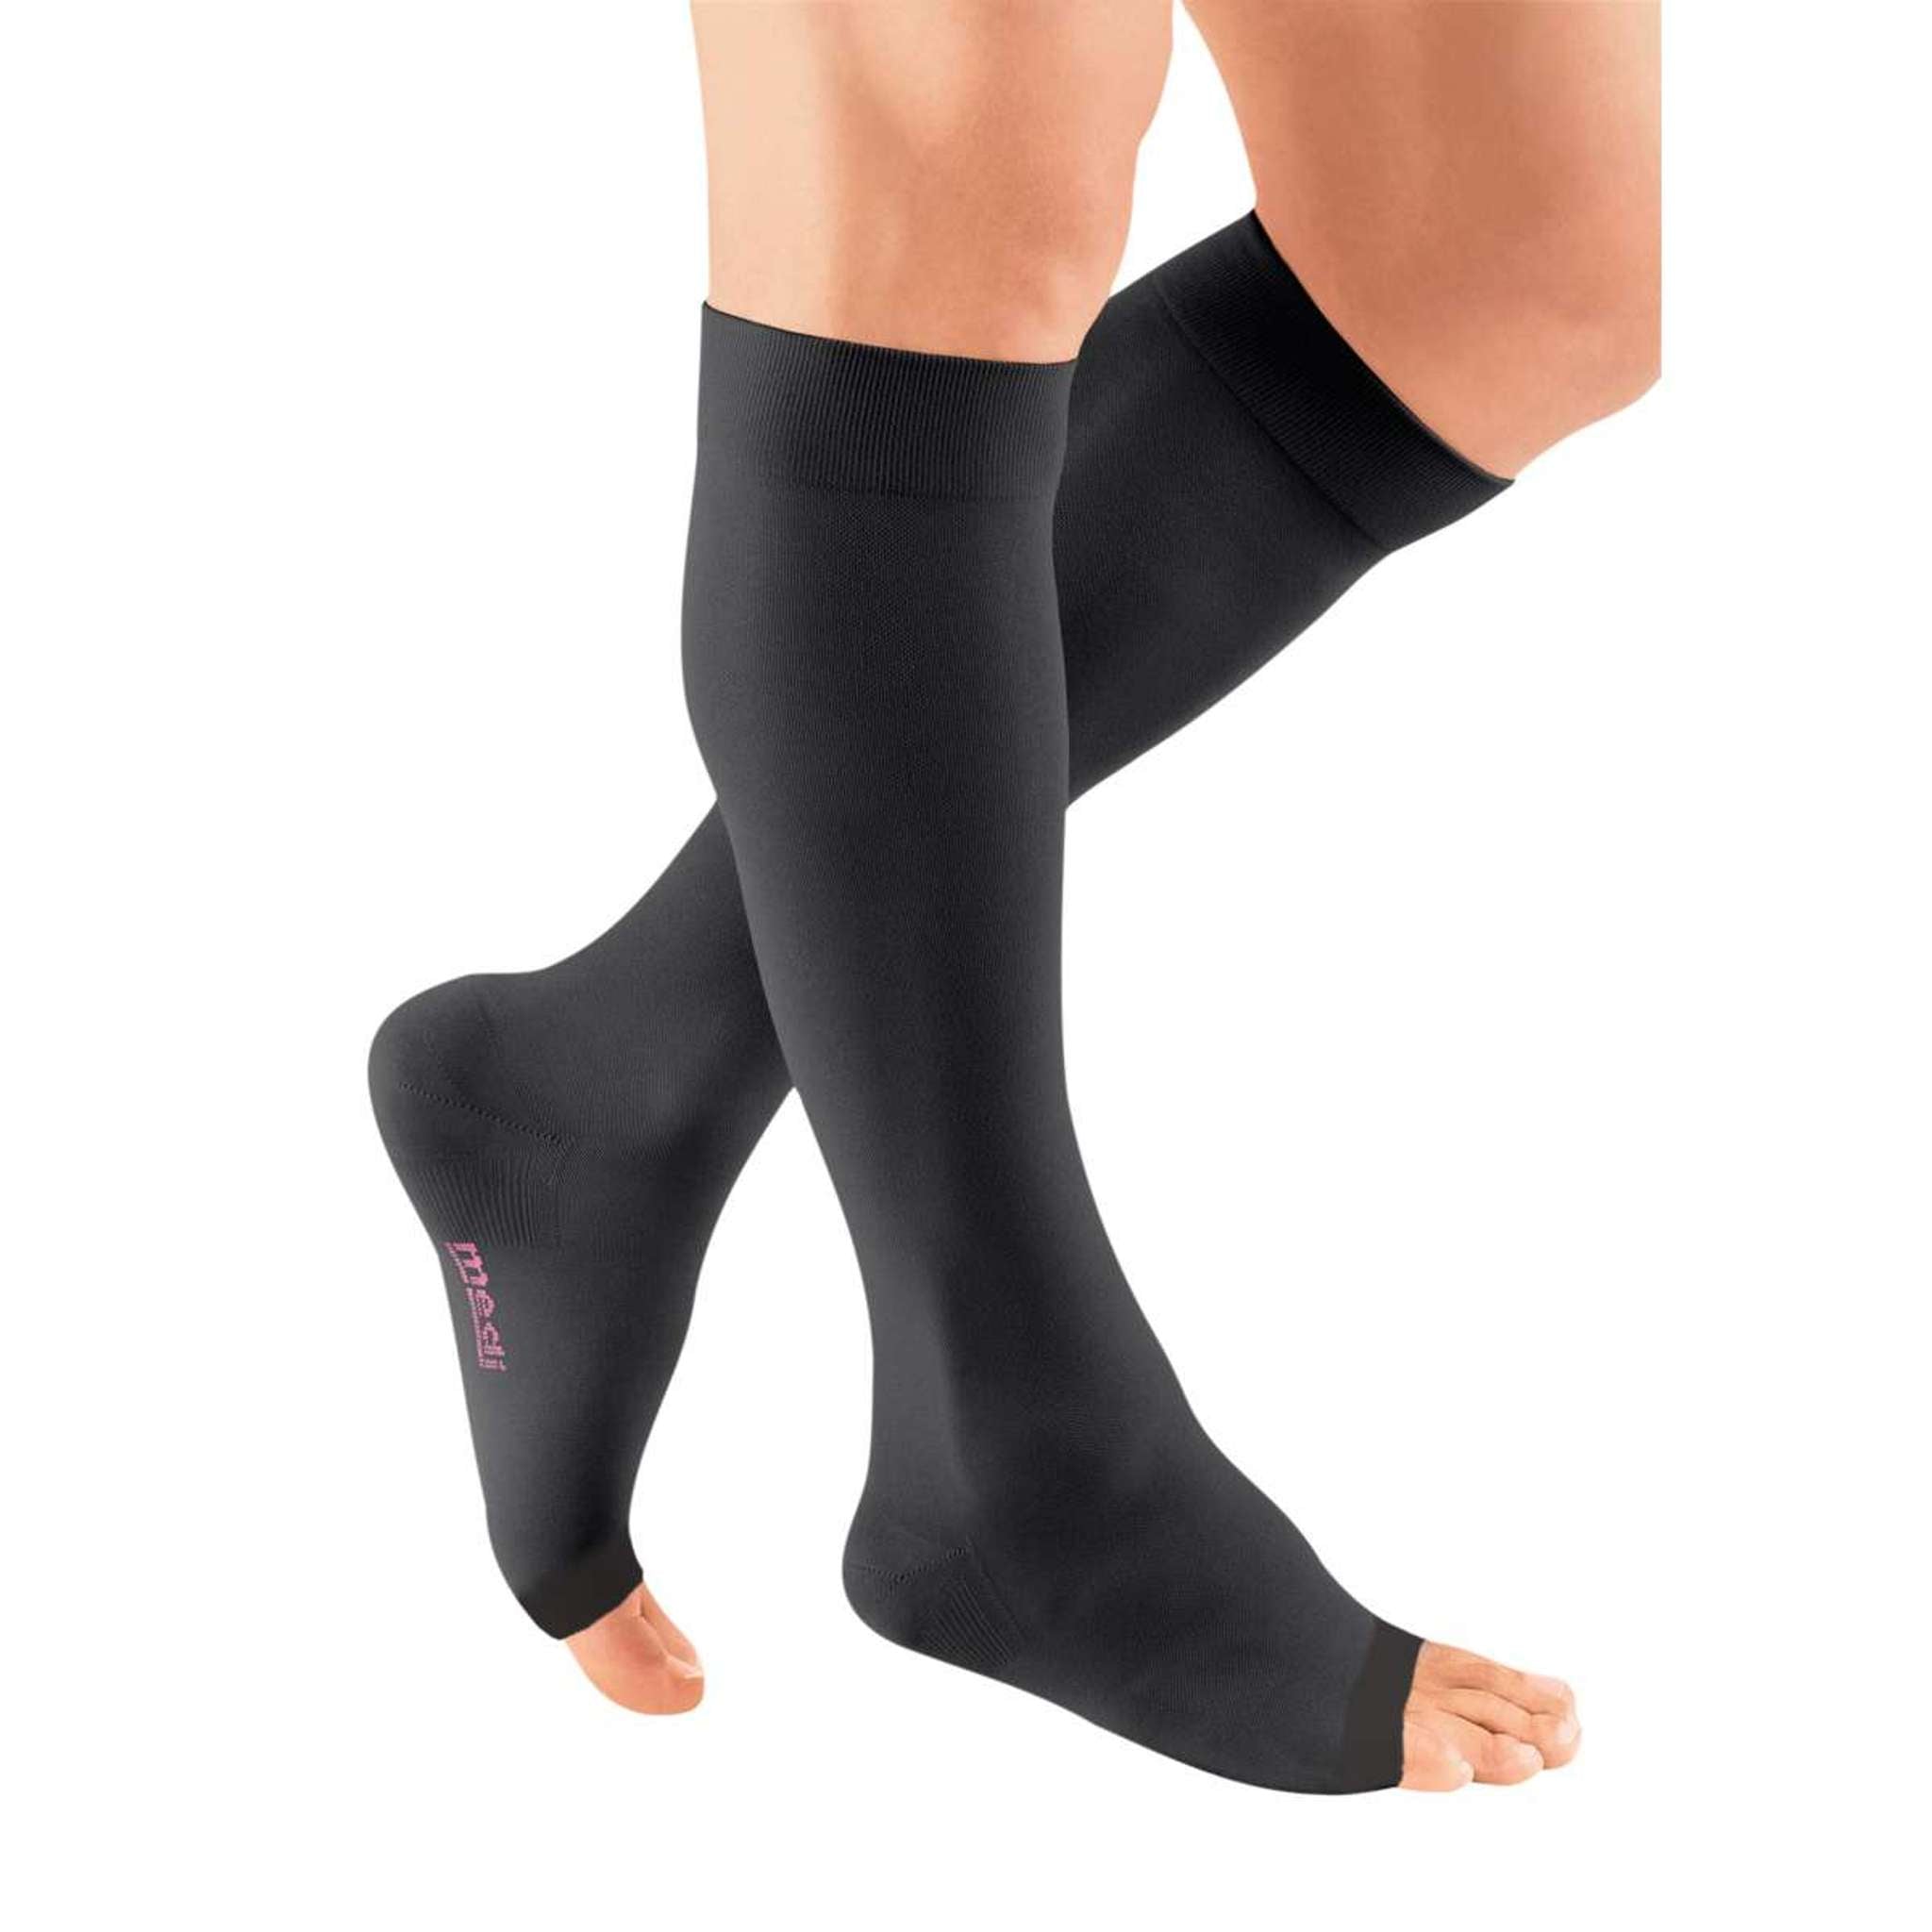 20-30 Mm Hg Open Toe Compression Socks With Zipper 